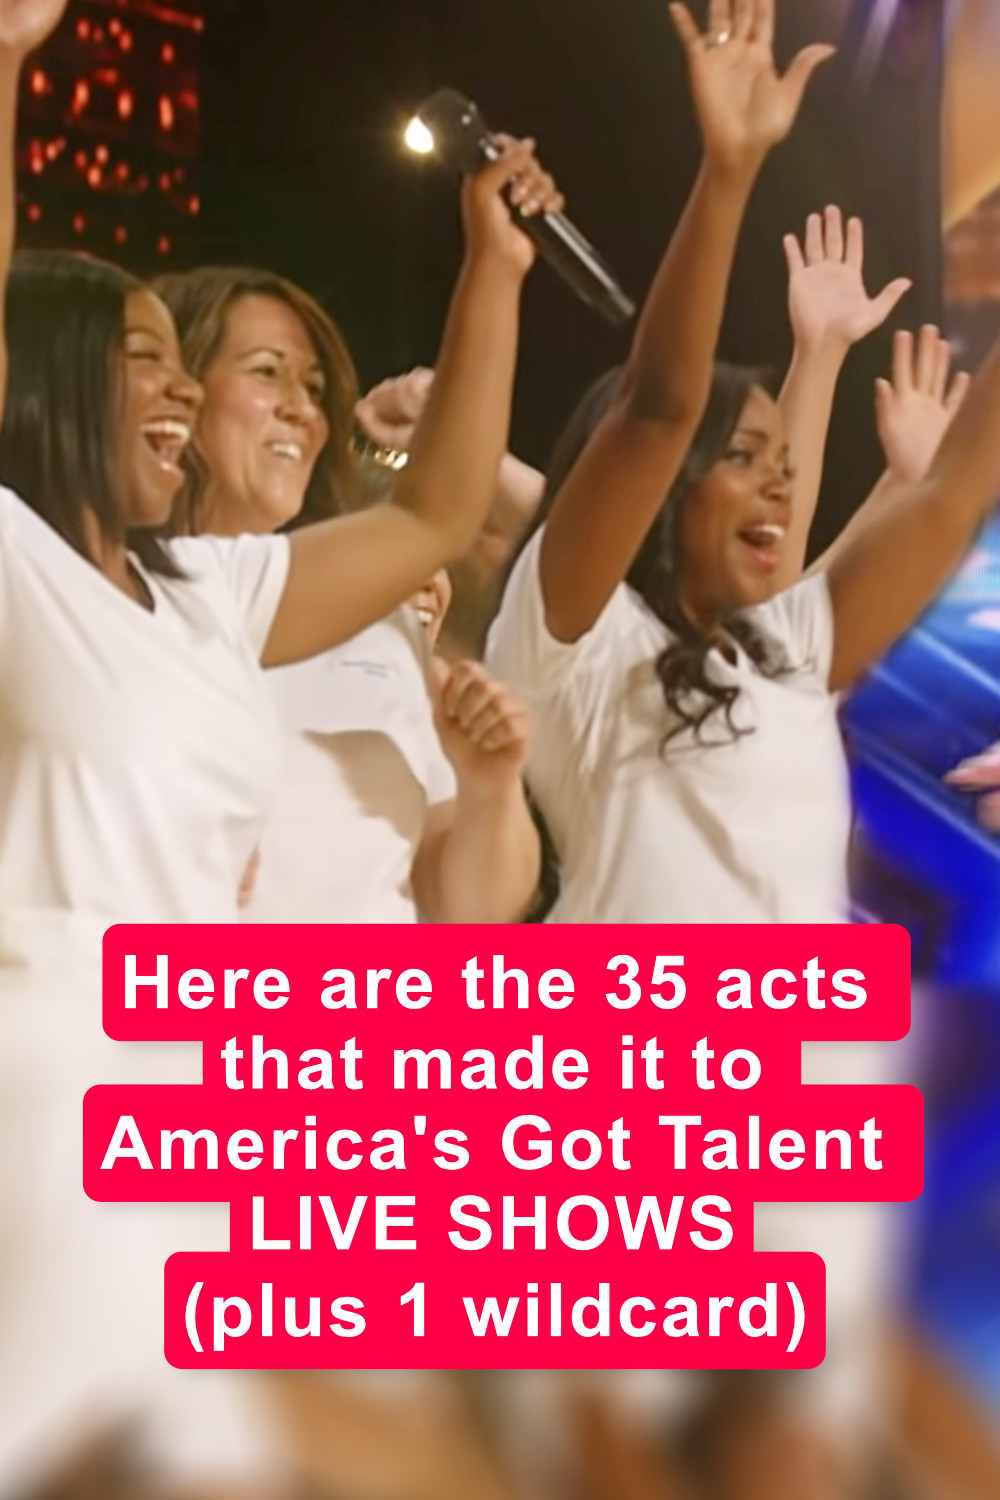 The 35 acts that made it to America\'s Got Talent LIVE shows and 1 wildcard